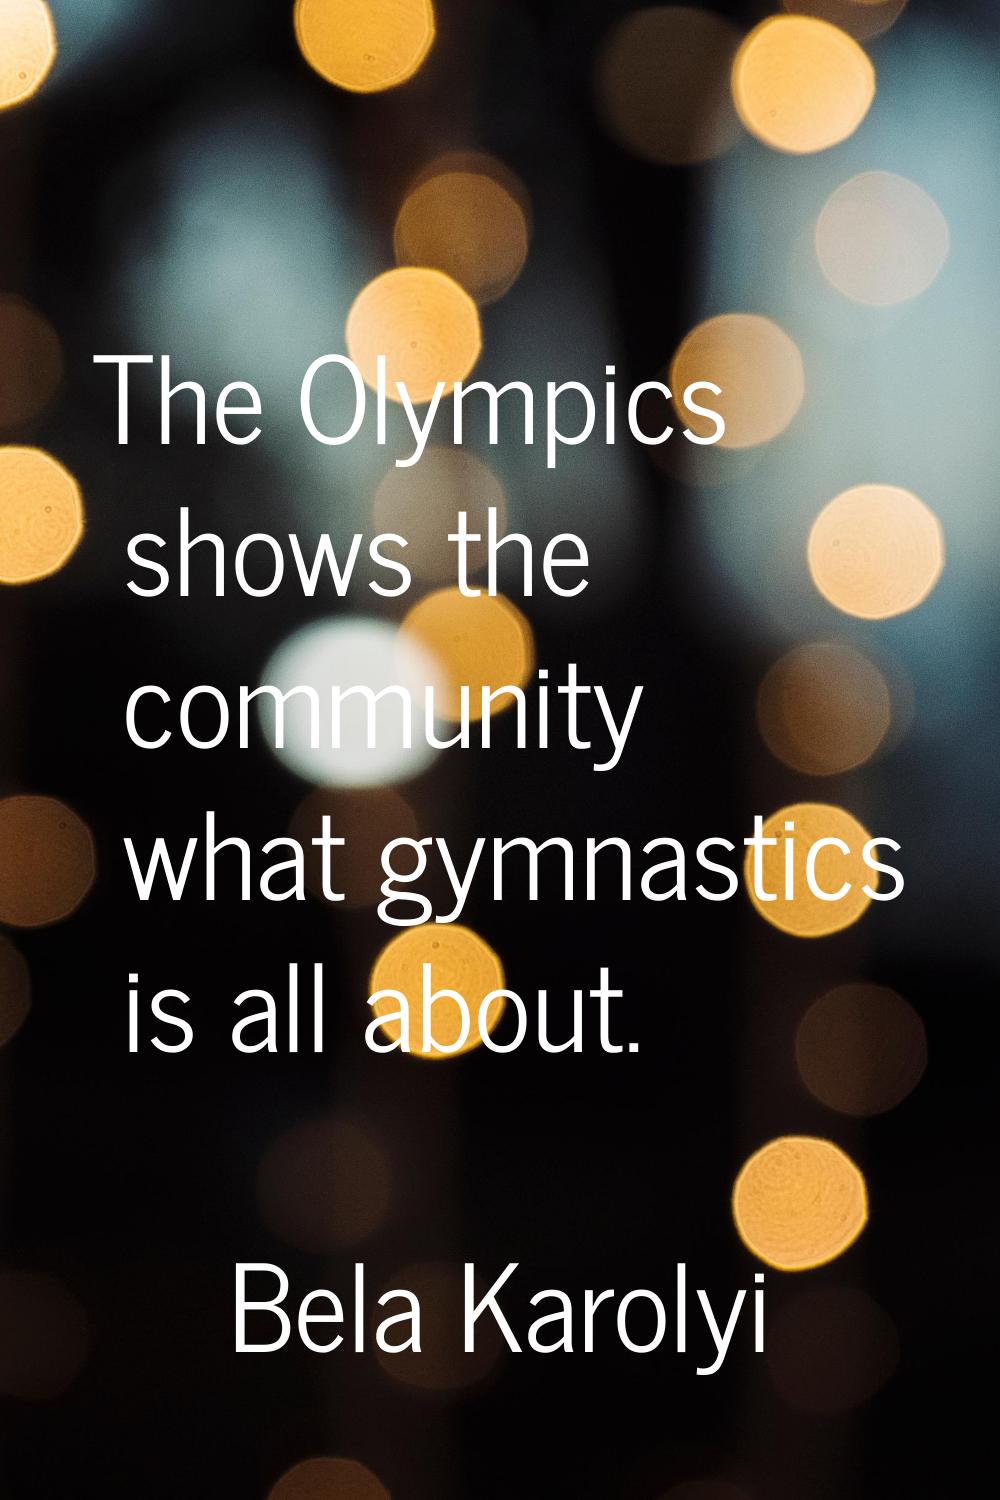 The Olympics shows the community what gymnastics is all about.